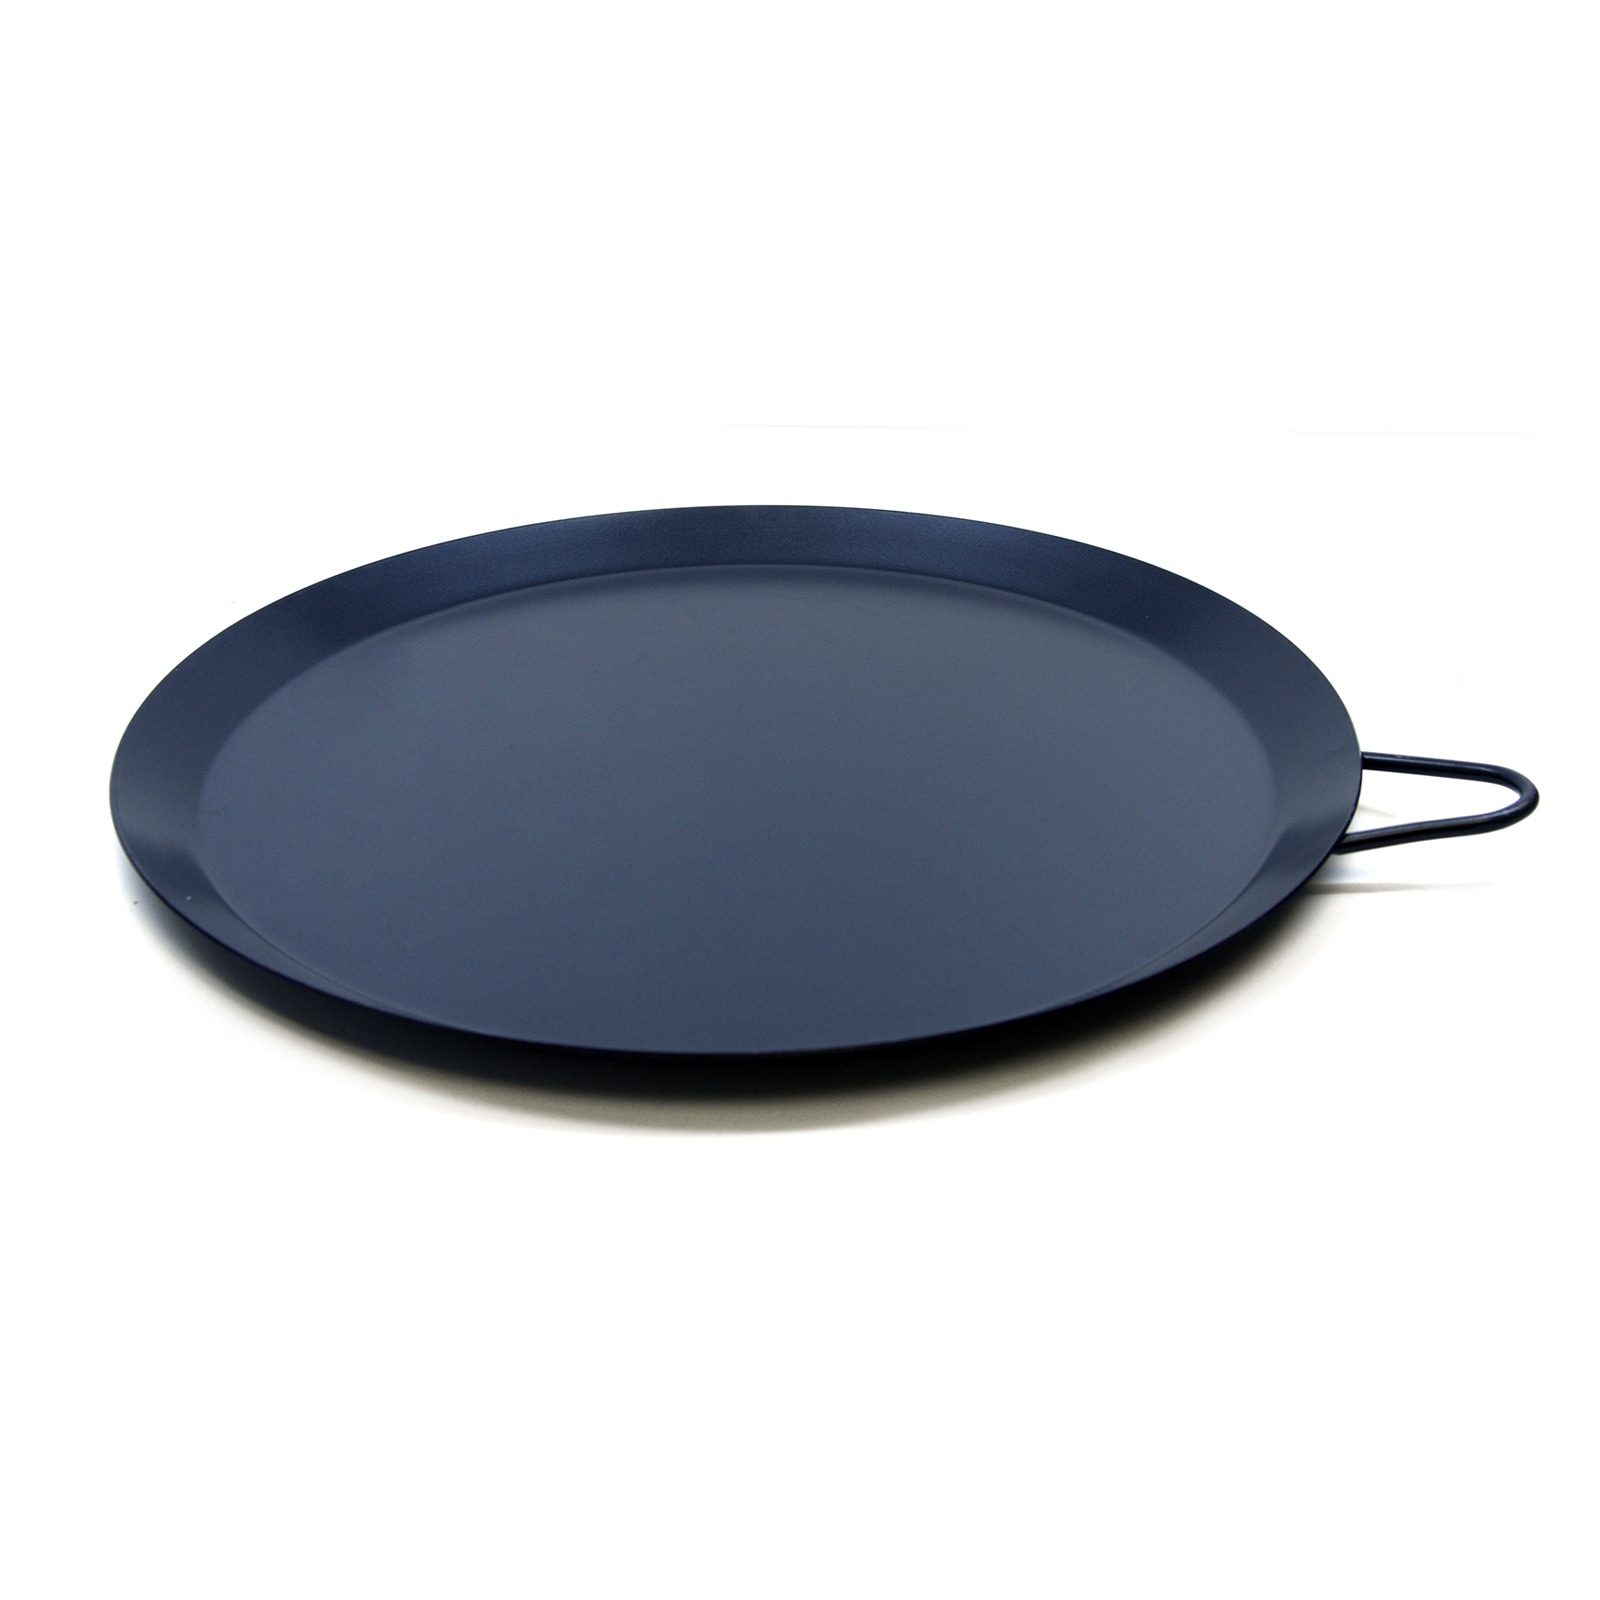 https://ak1.ostkcdn.com/images/products/is/images/direct/9187135c8893d0ec3144293a046f4bfe05c0d3cf/Brentwood-9.5-Round-Griddle-%28Comal%29.jpg